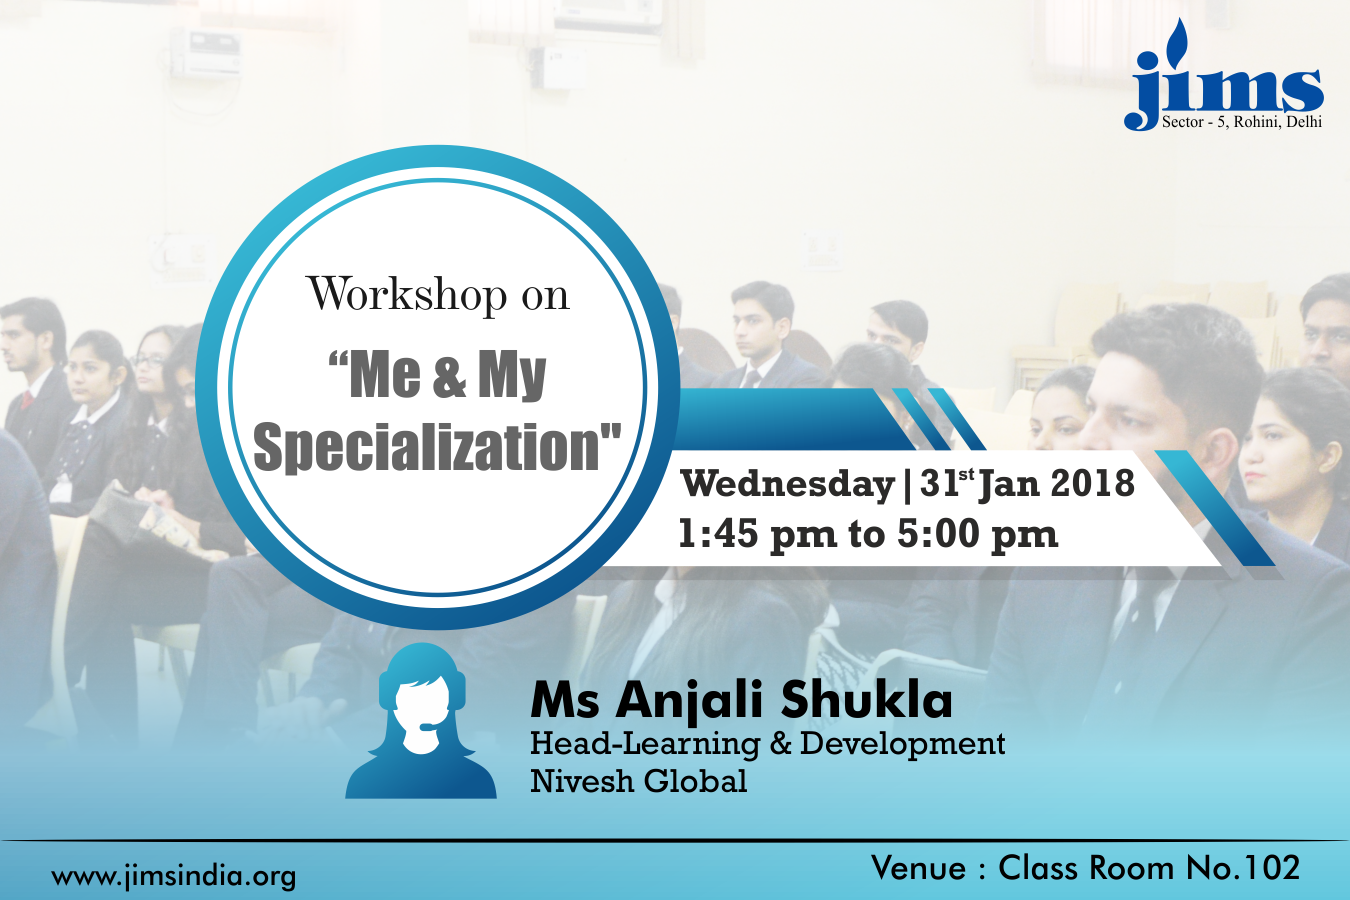 JIMS is organizing a workshop on Me and My Specialisation